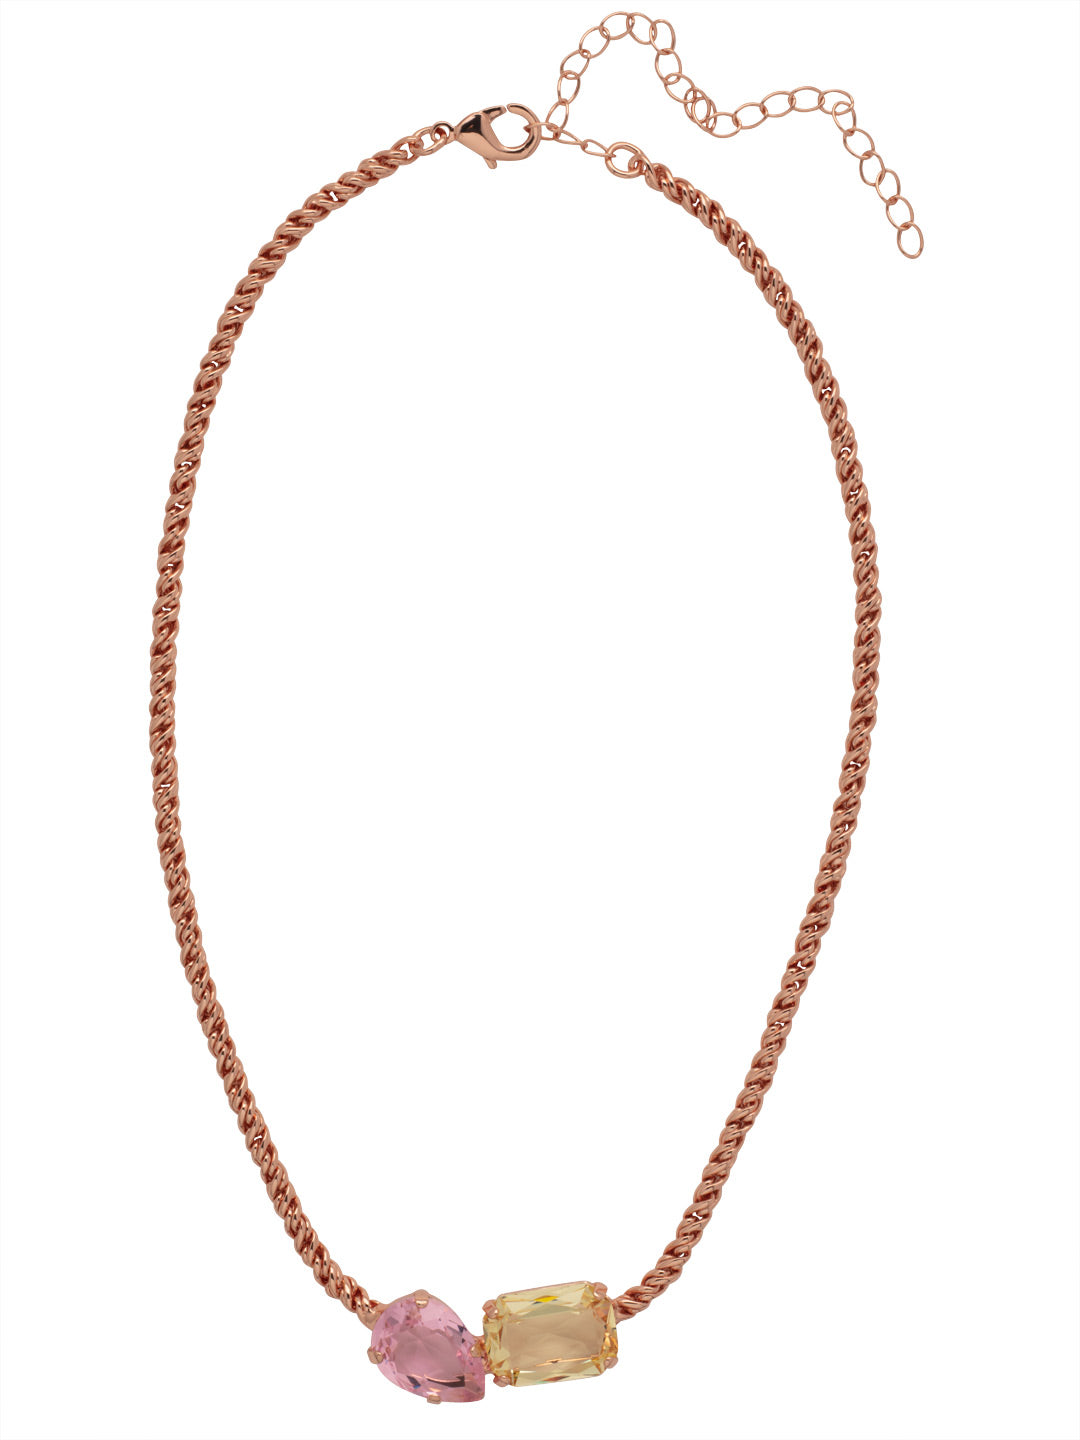 Andi Pendant Necklace - NFF12RGPPN - <p>The Andi Pendant Necklace features a trendy pear cut and emerald cut candy gem on an adjustable rope chain, secured by a lobster claw clasp. From Sorrelli's Pink Pineapple collection in our Rose Gold-tone finish.</p>